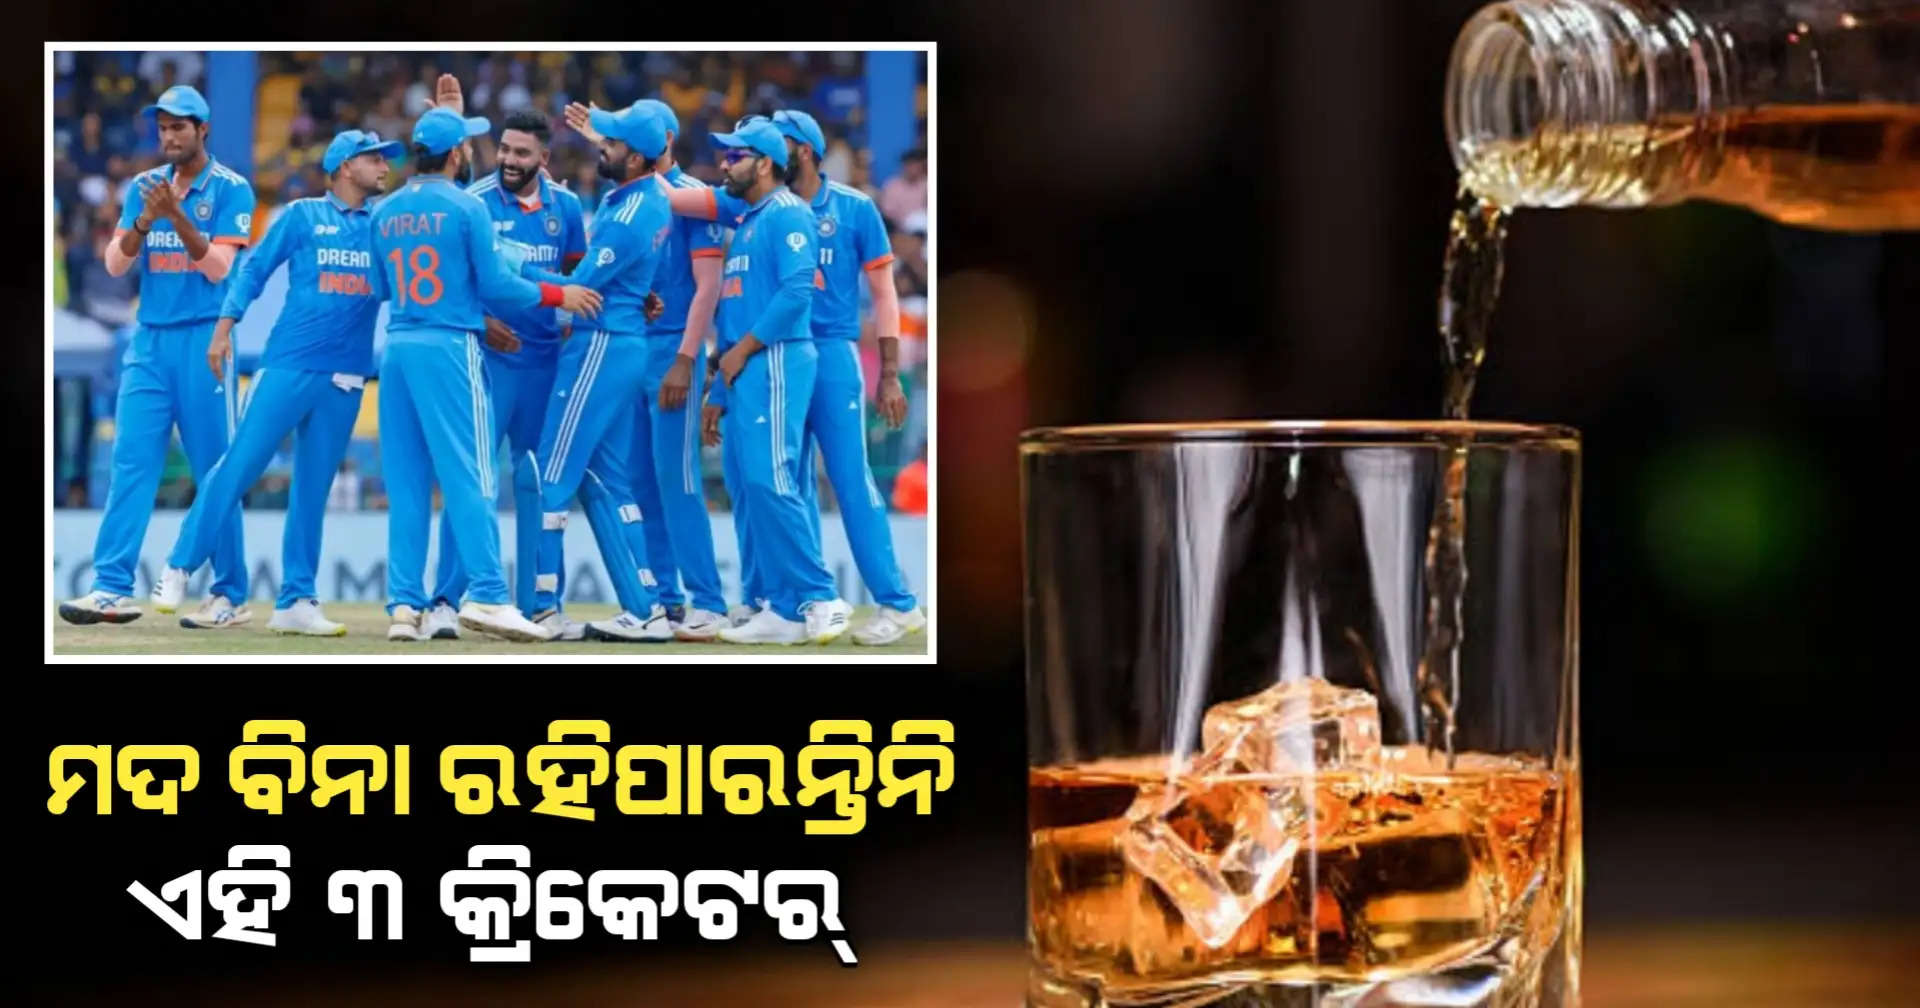 Alcohol favourite cricketer